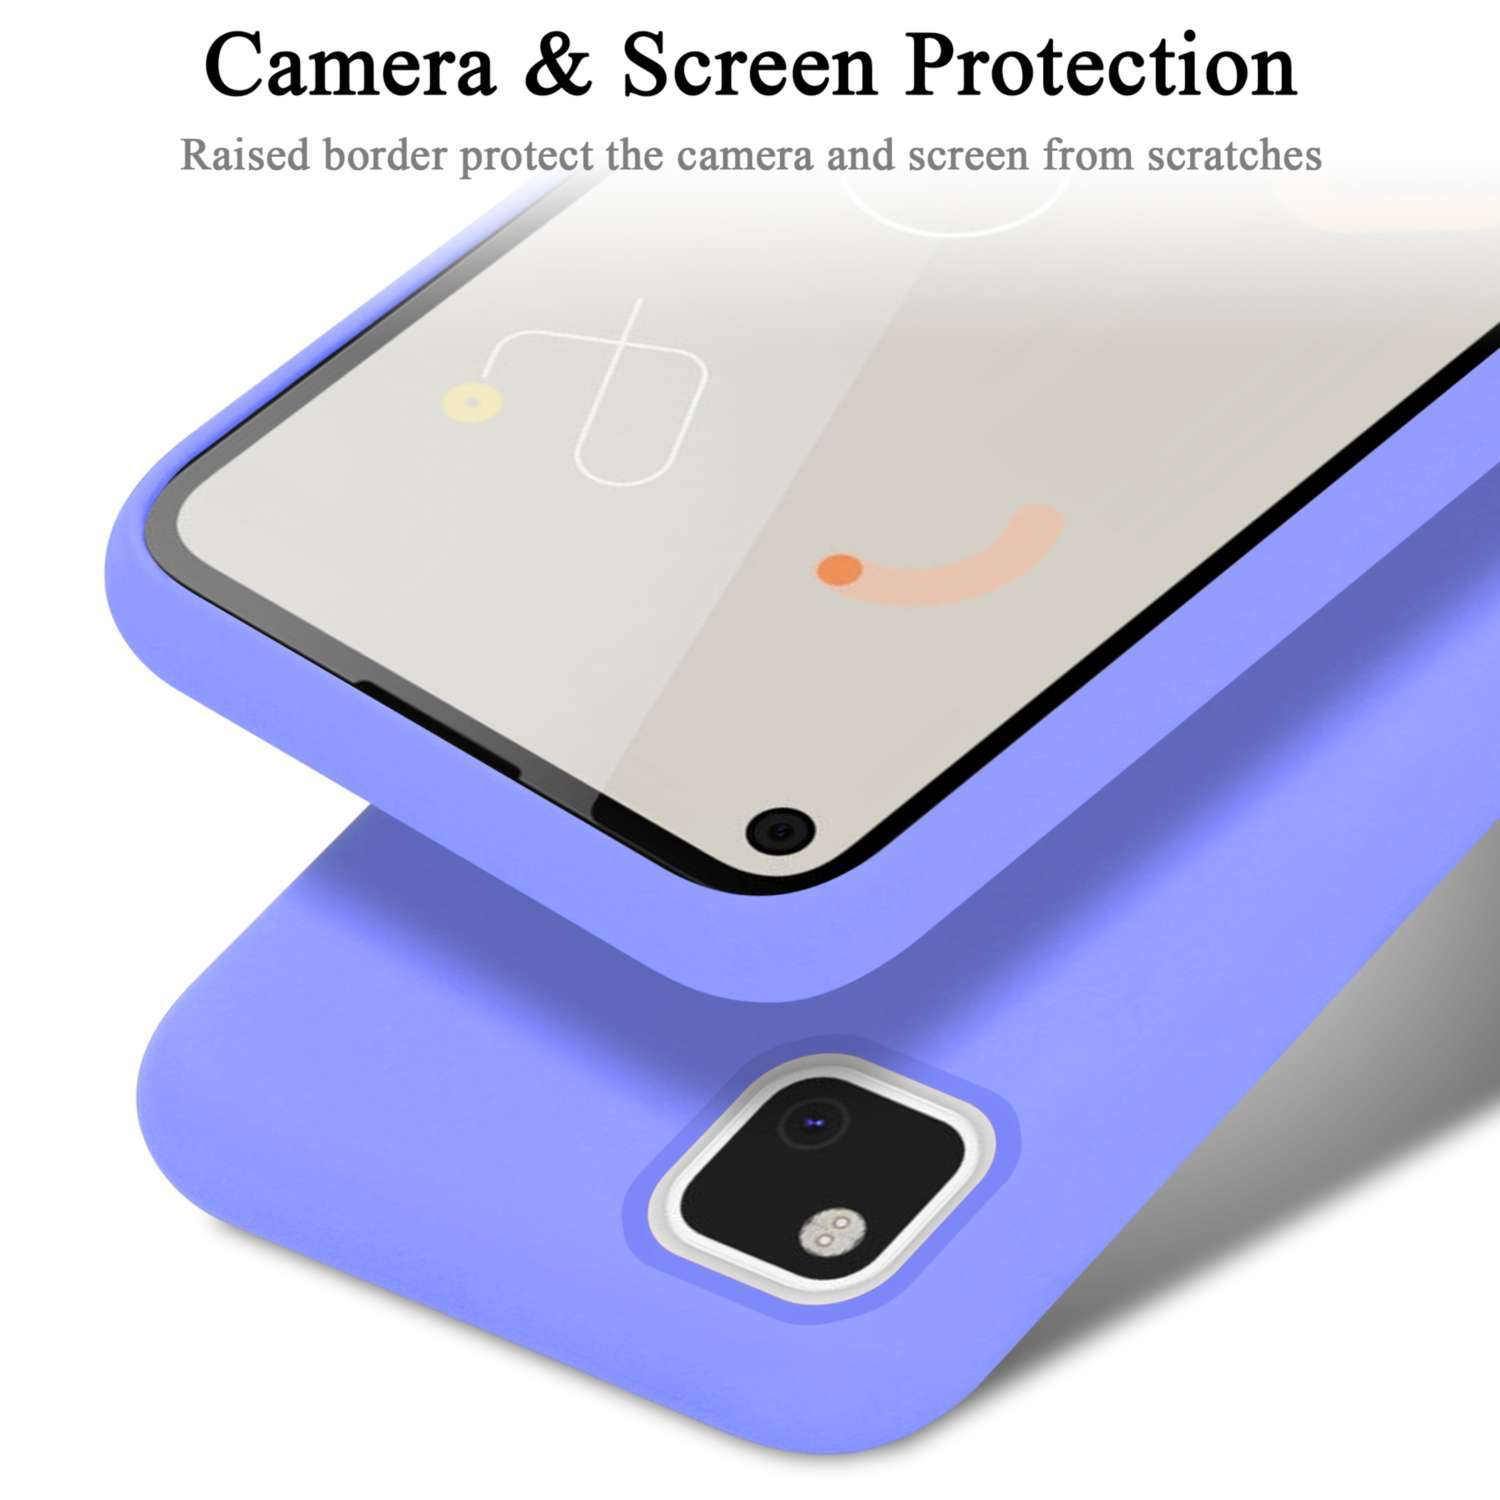 Style, 5G, Liquid 4A LIQUID CADORABO Backcover, Case LILA HELL PIXEL Silicone Hülle im Google,